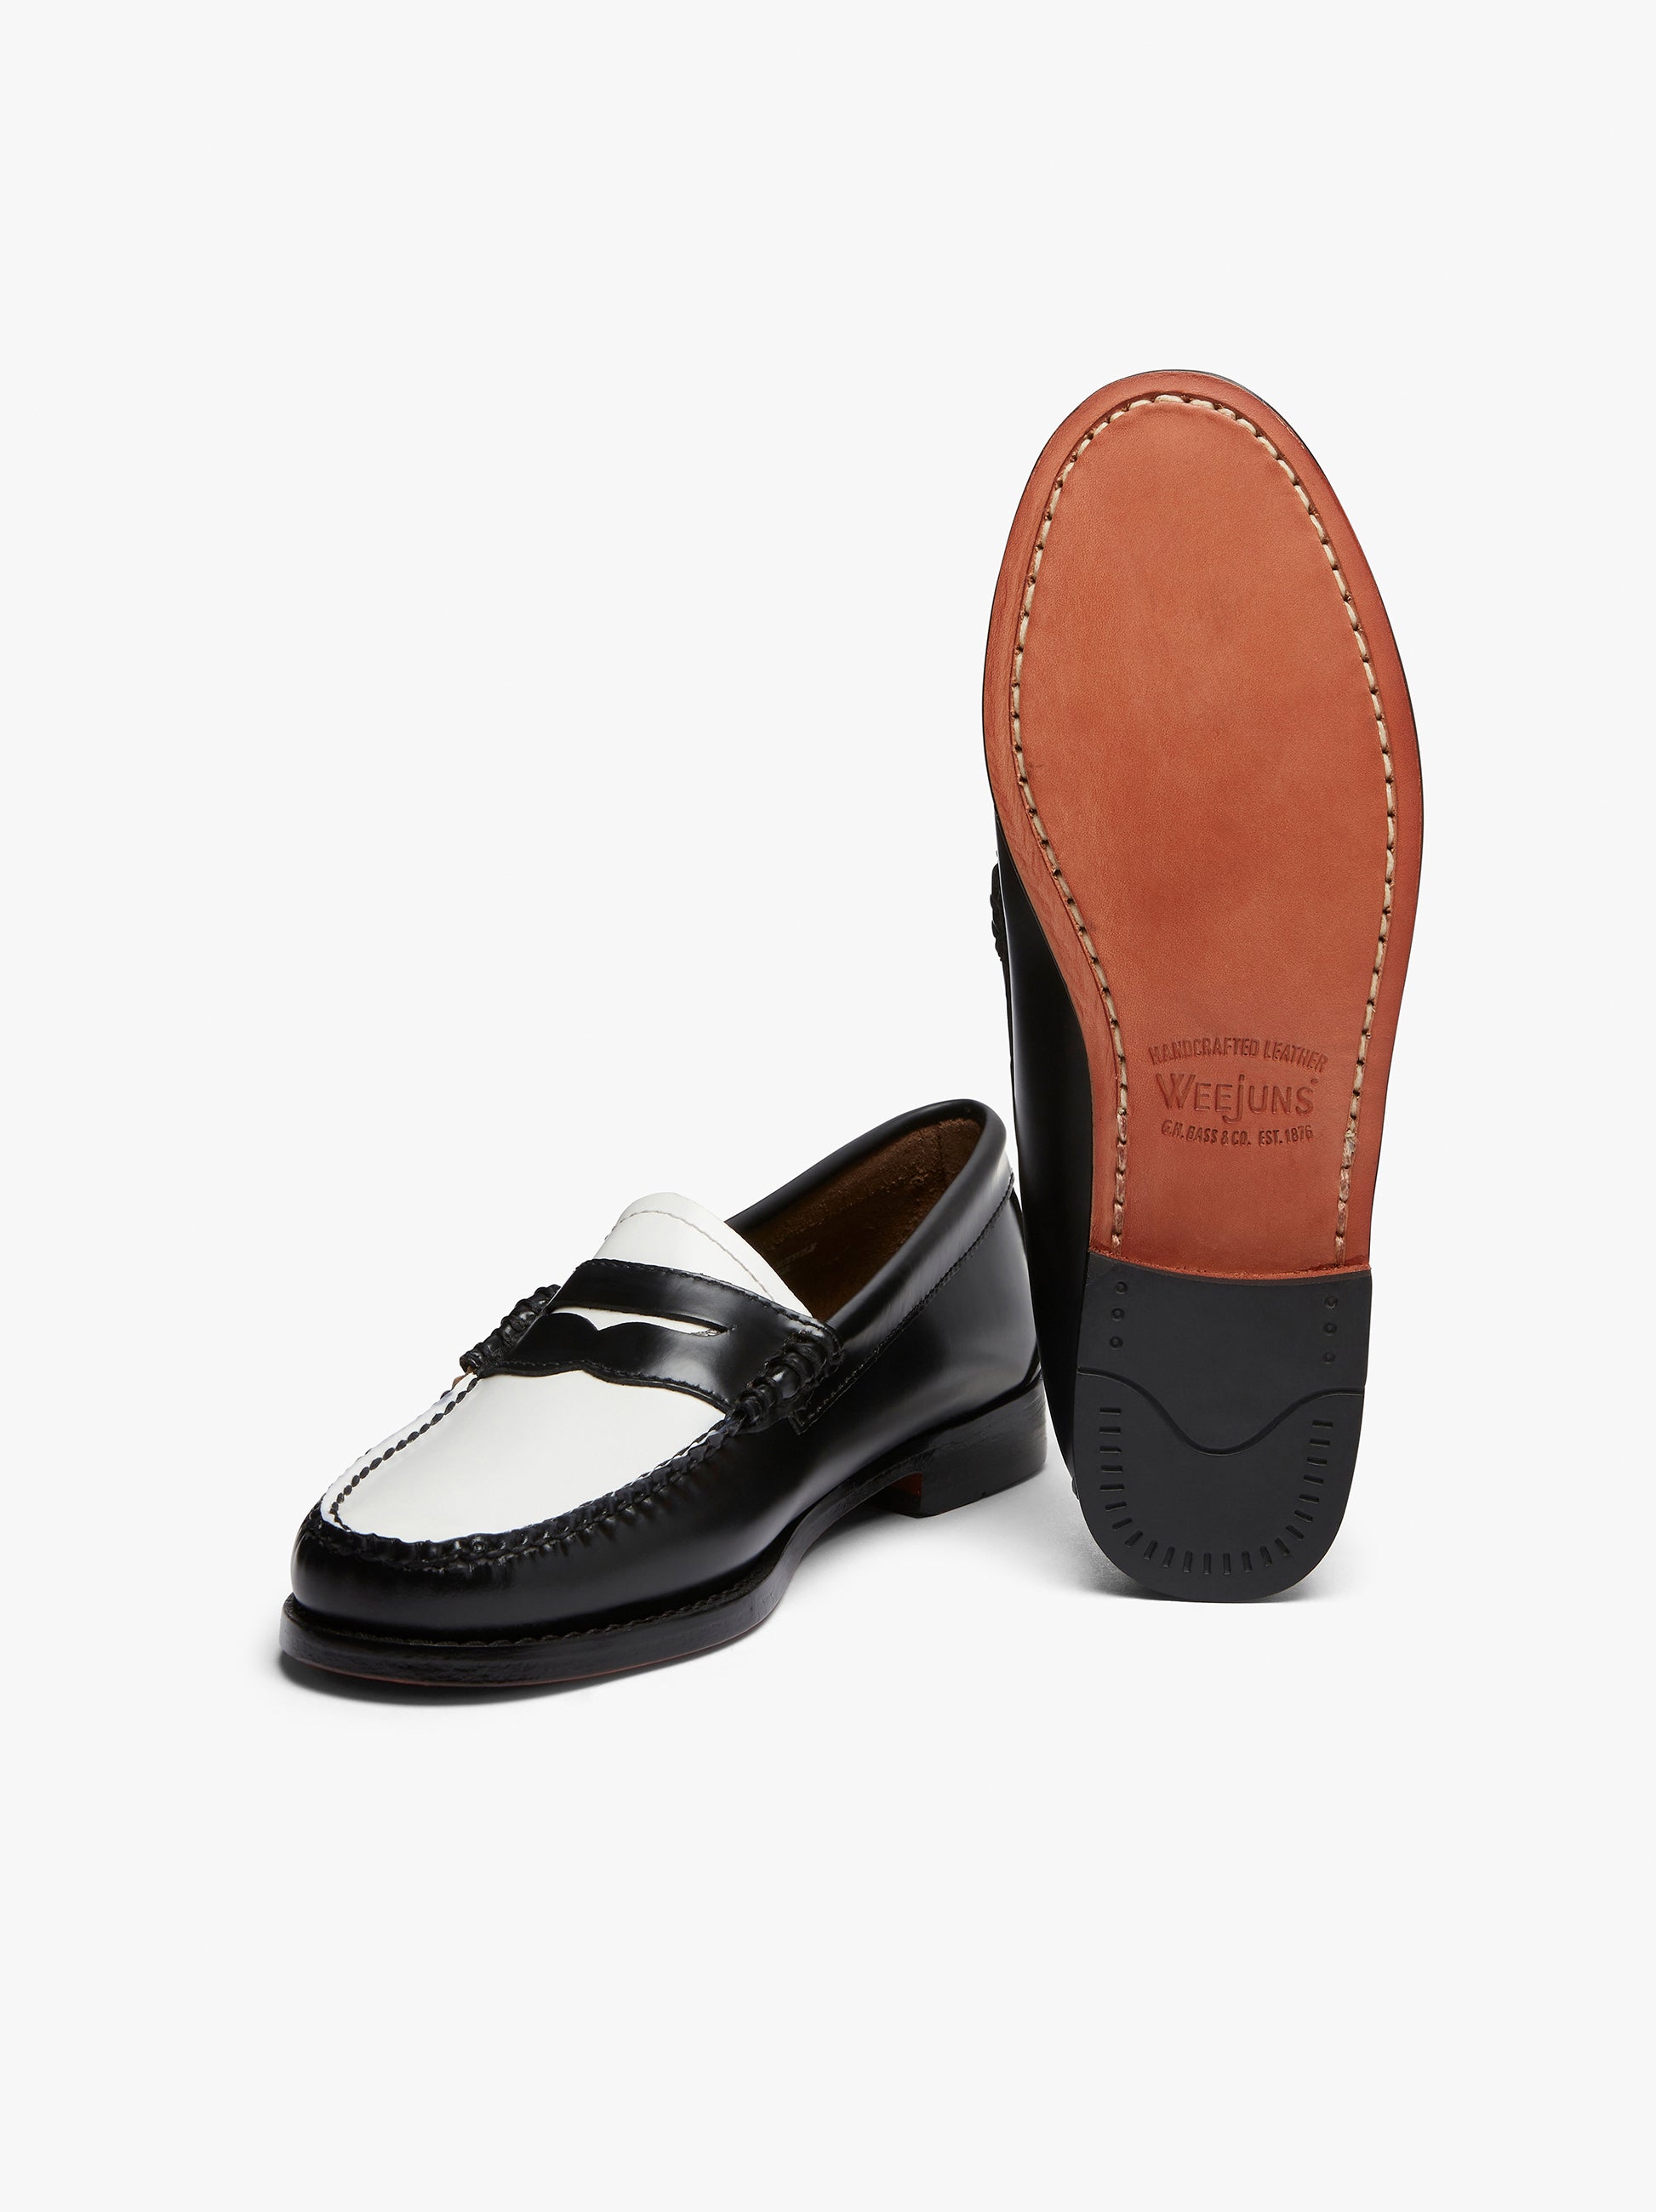 Black And White Penny Loafers Womens | Black And White Loafers